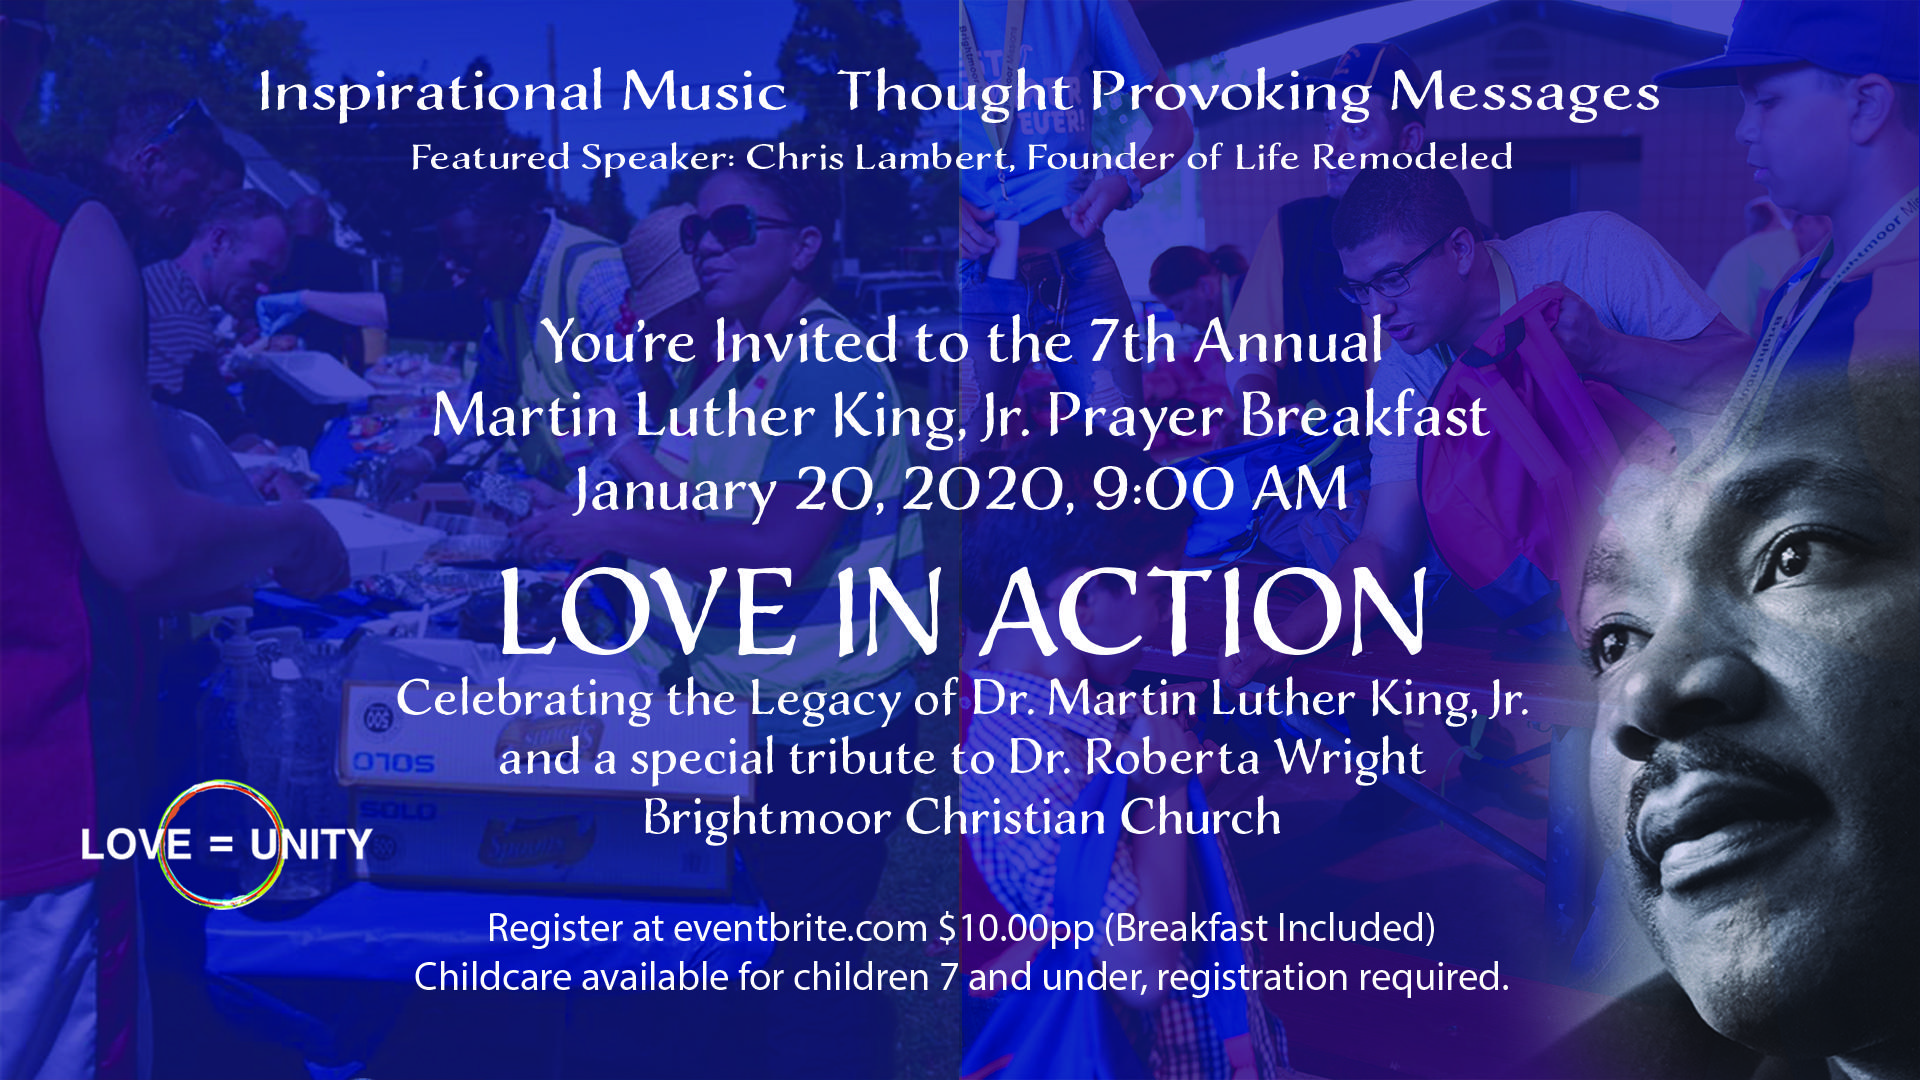 Love in Action: Celebrating the Legacy of Dr. Martin Luther King, Jr.